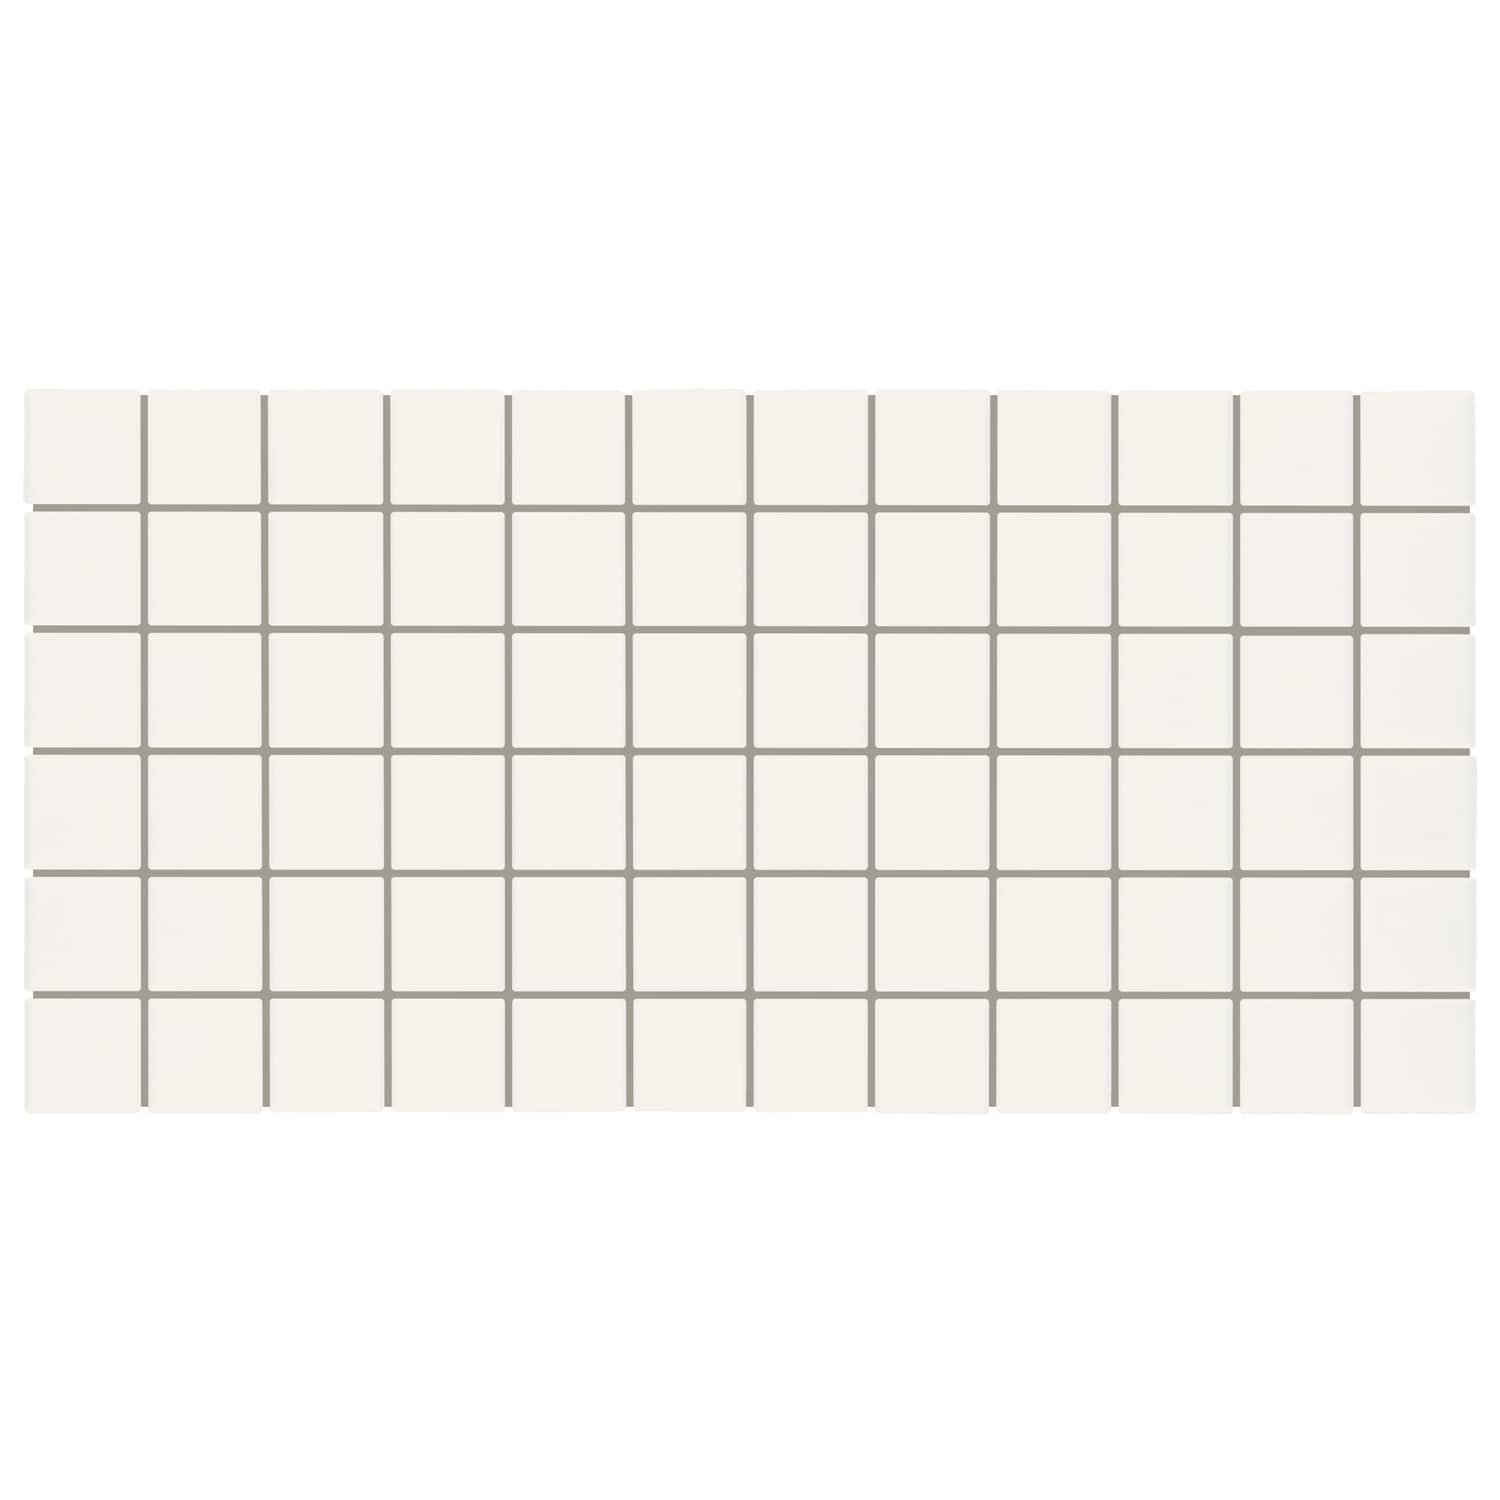 American Olean Set of 12 Glossy White Ceramic Tiles for Arts & Crafts